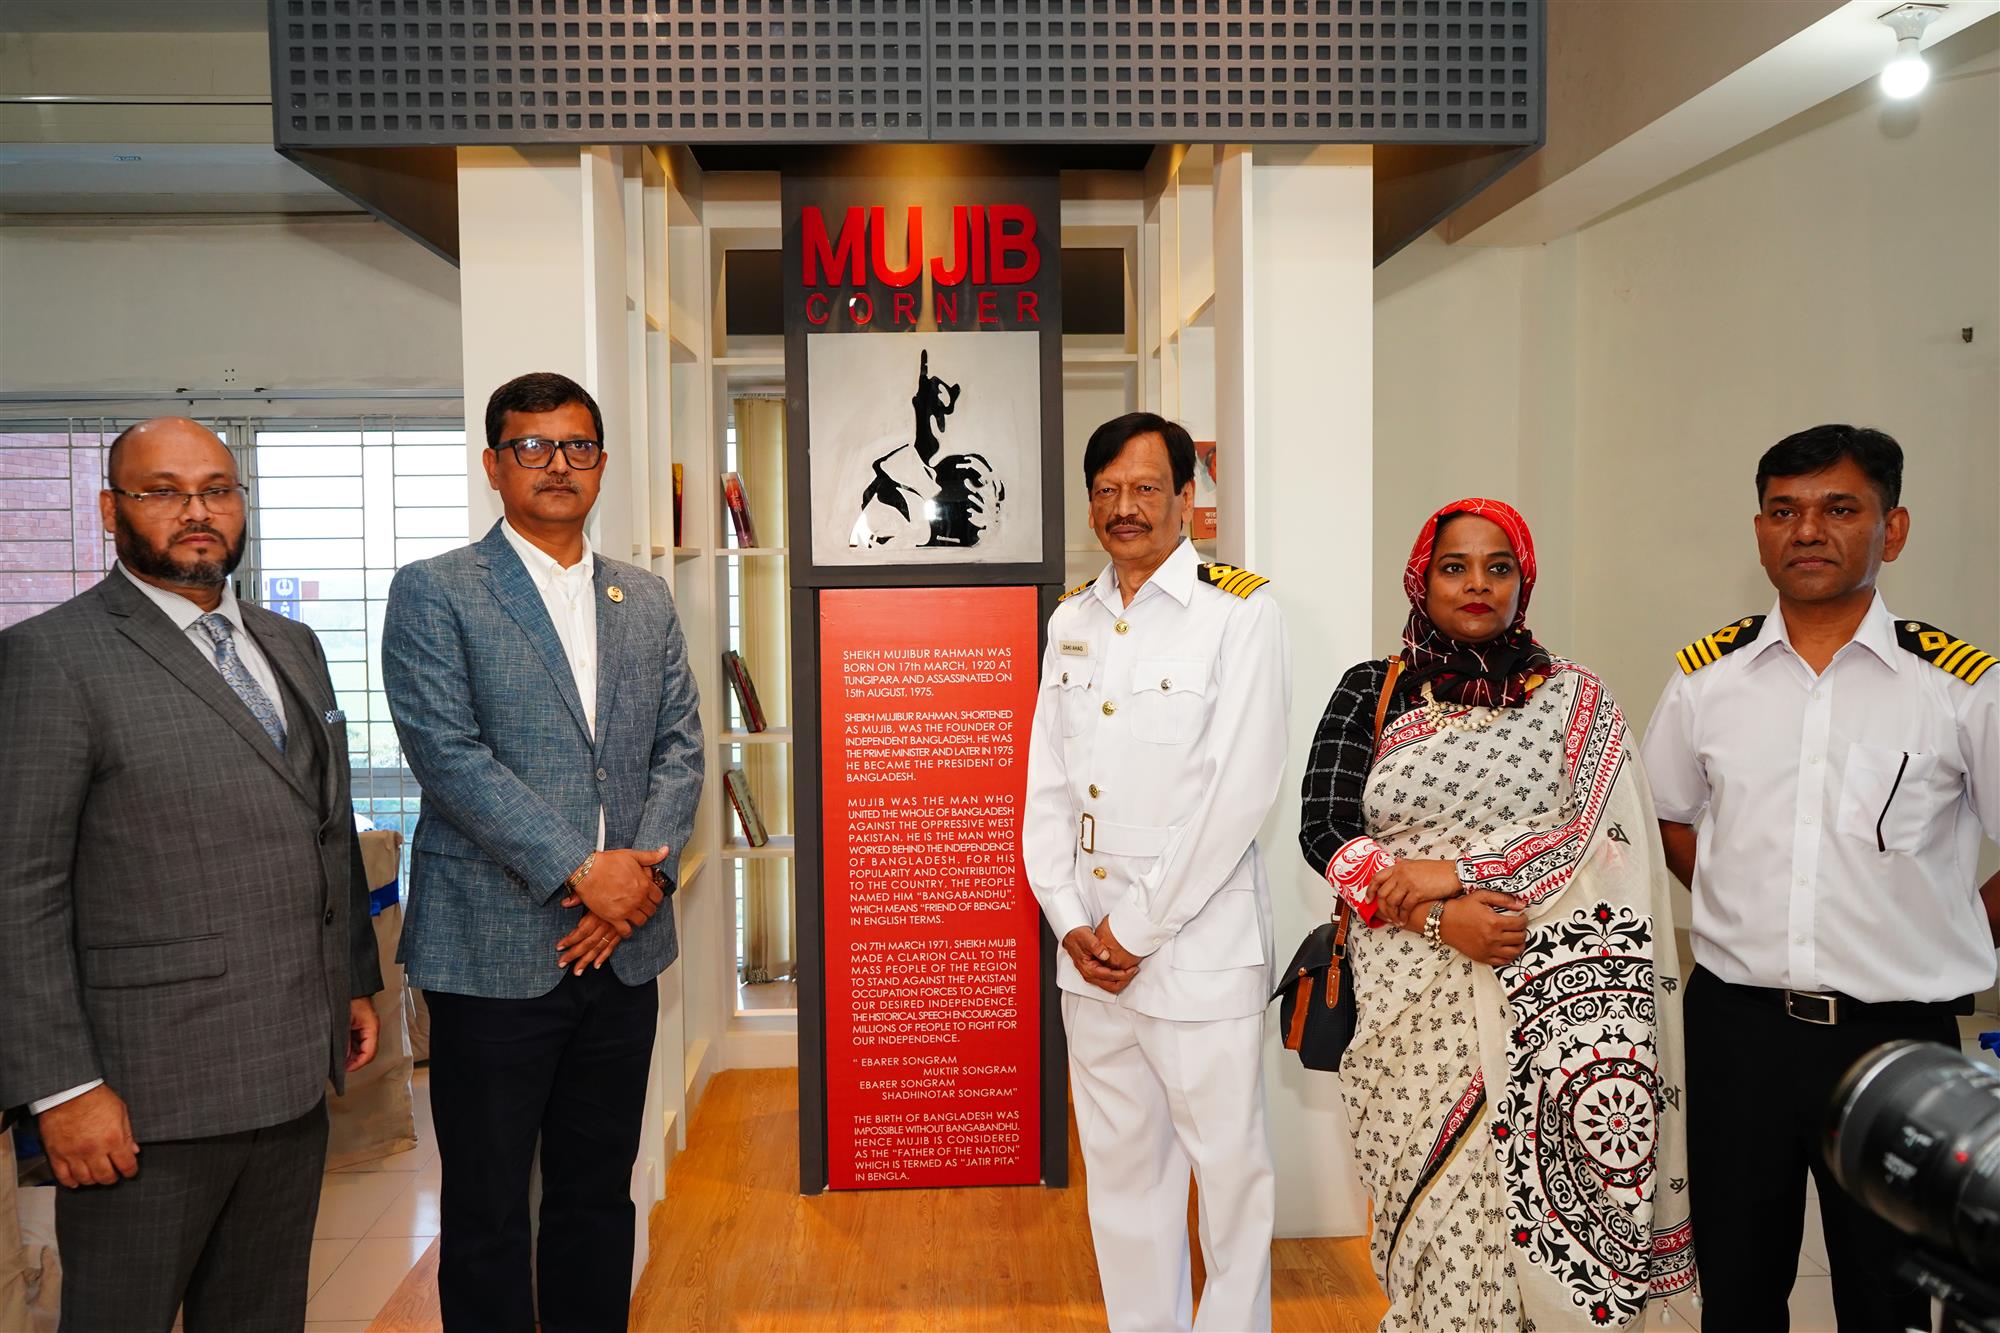 Hon'ble State Minister, Ministry of Shipping visits IMA